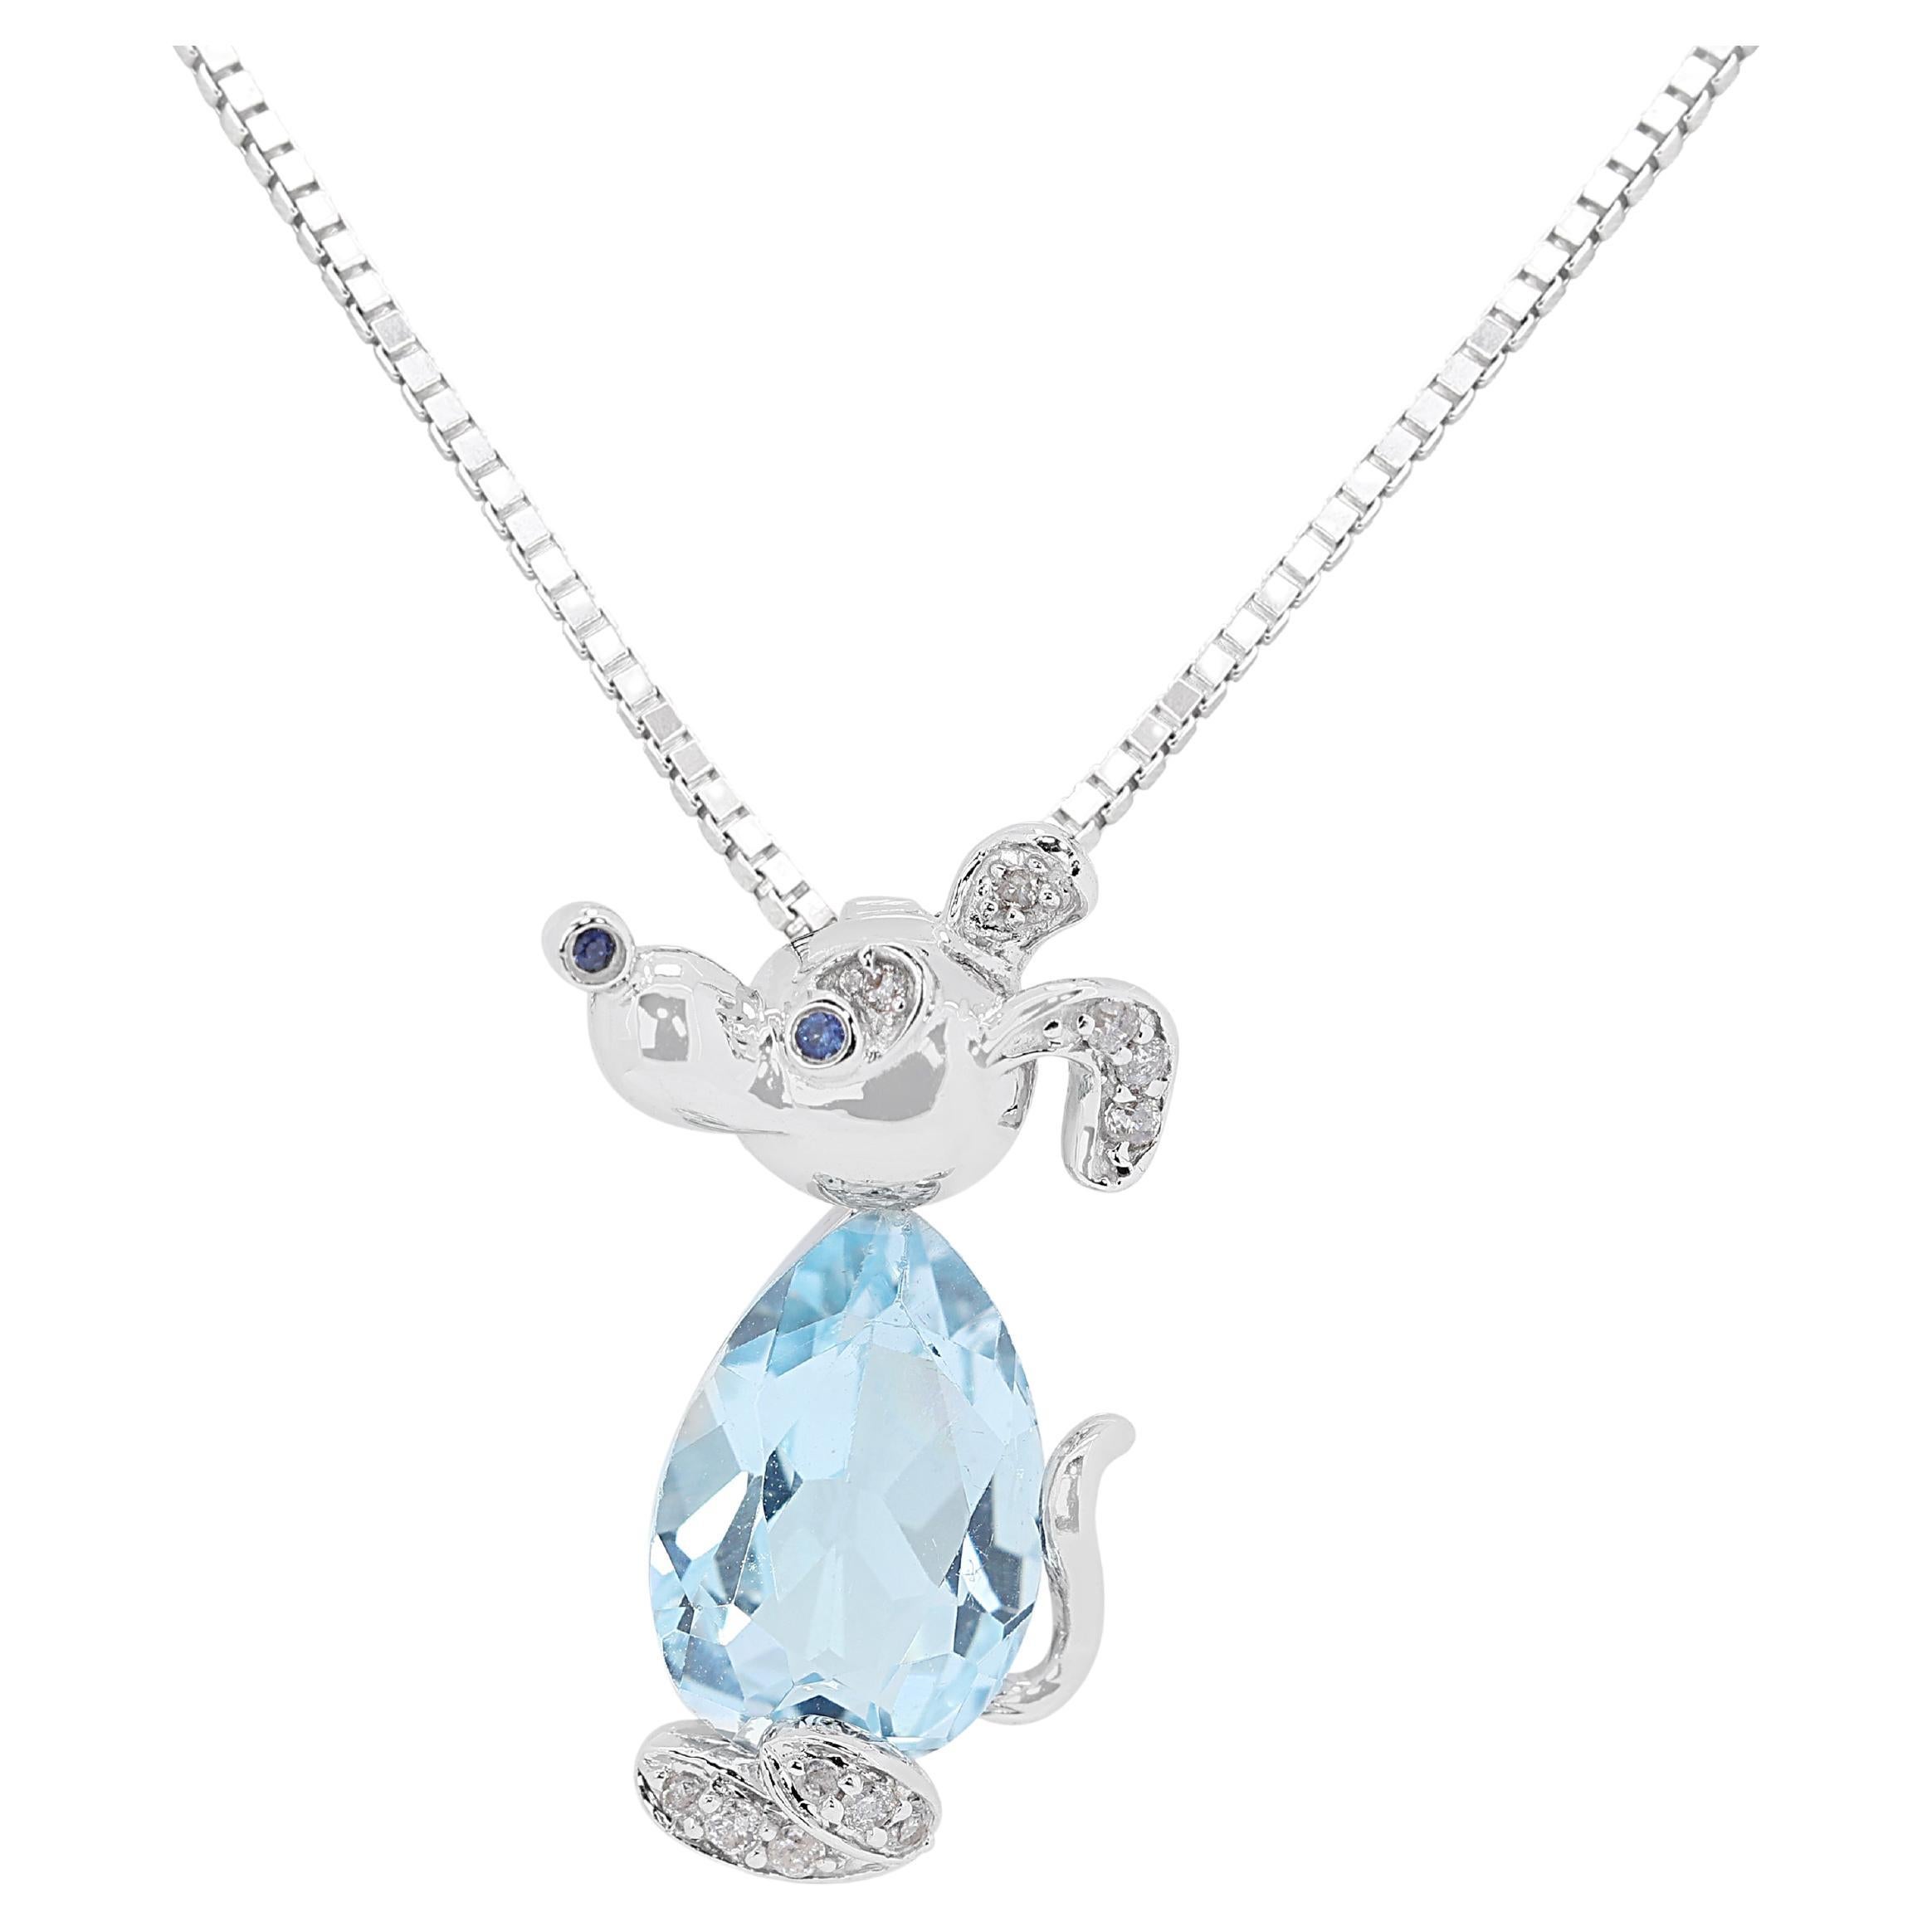 Shining 1.45ct Topaz Pendant w/ Sapphires & Diamonds - (Chain not Included) For Sale